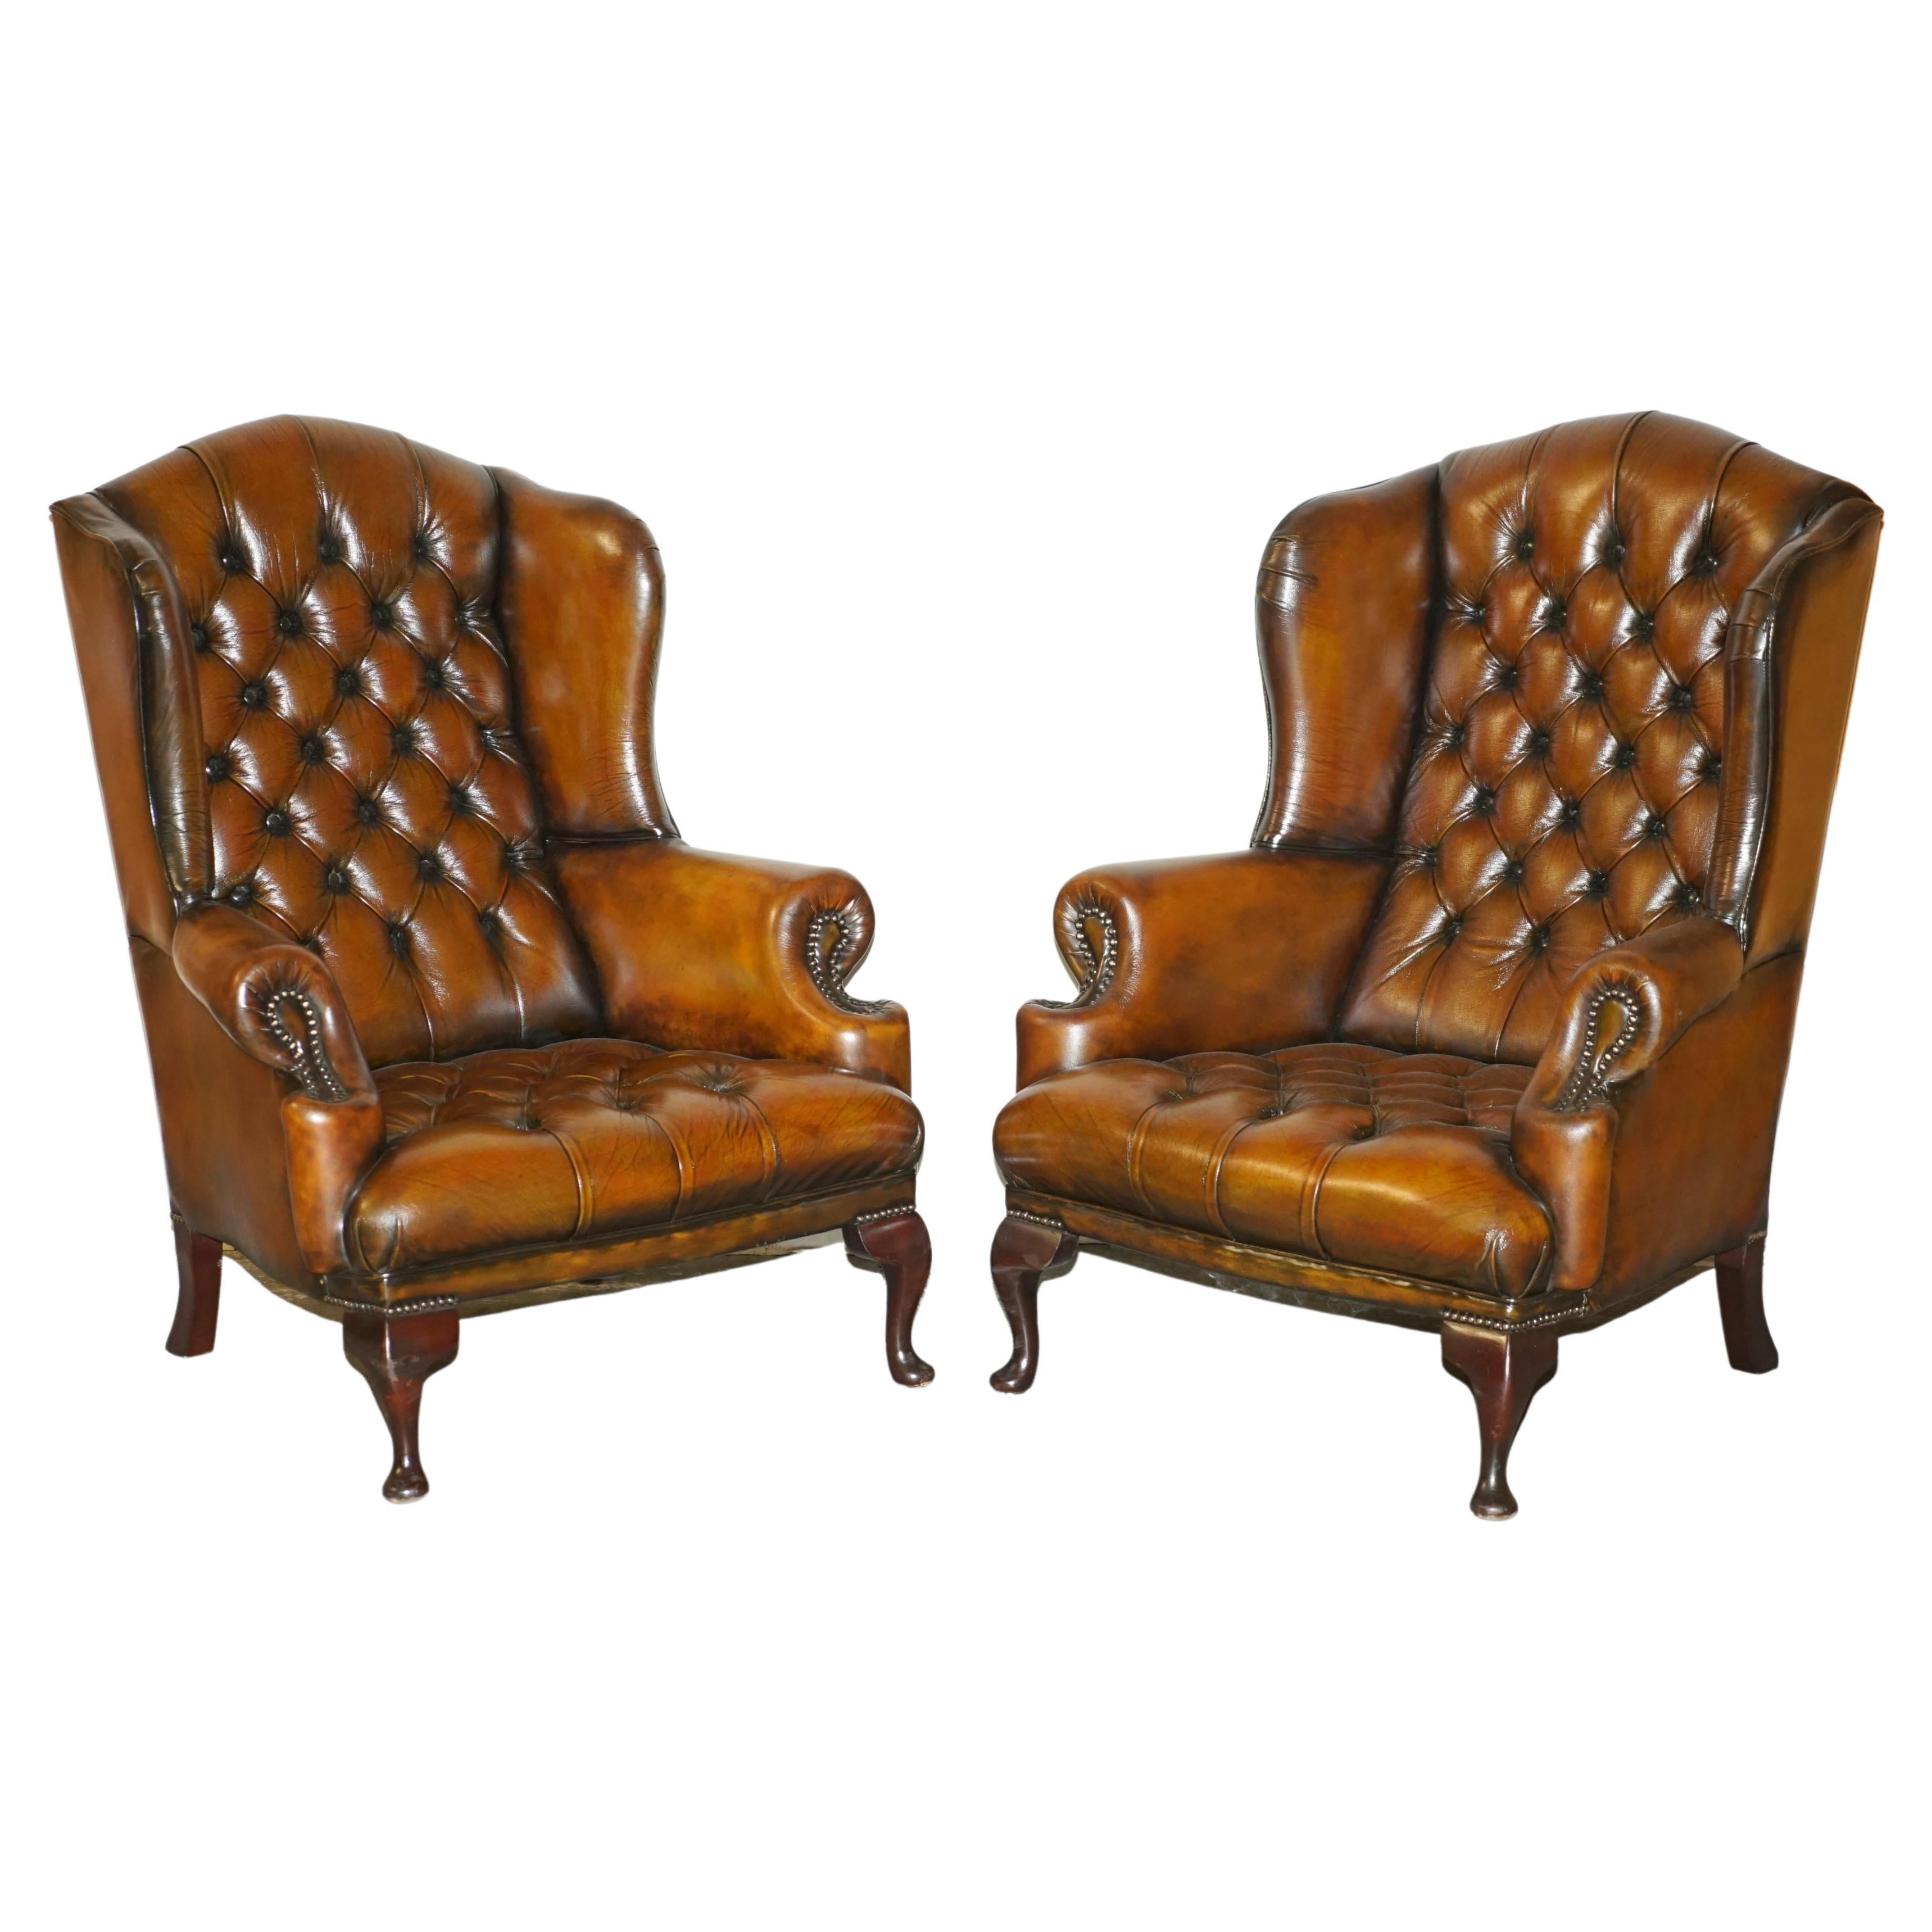 RESTORED PAIR OF WiLLIAM MORRIS BROWN LEATHER CHESTERFIELD WINGBACK ARMCHAIRS